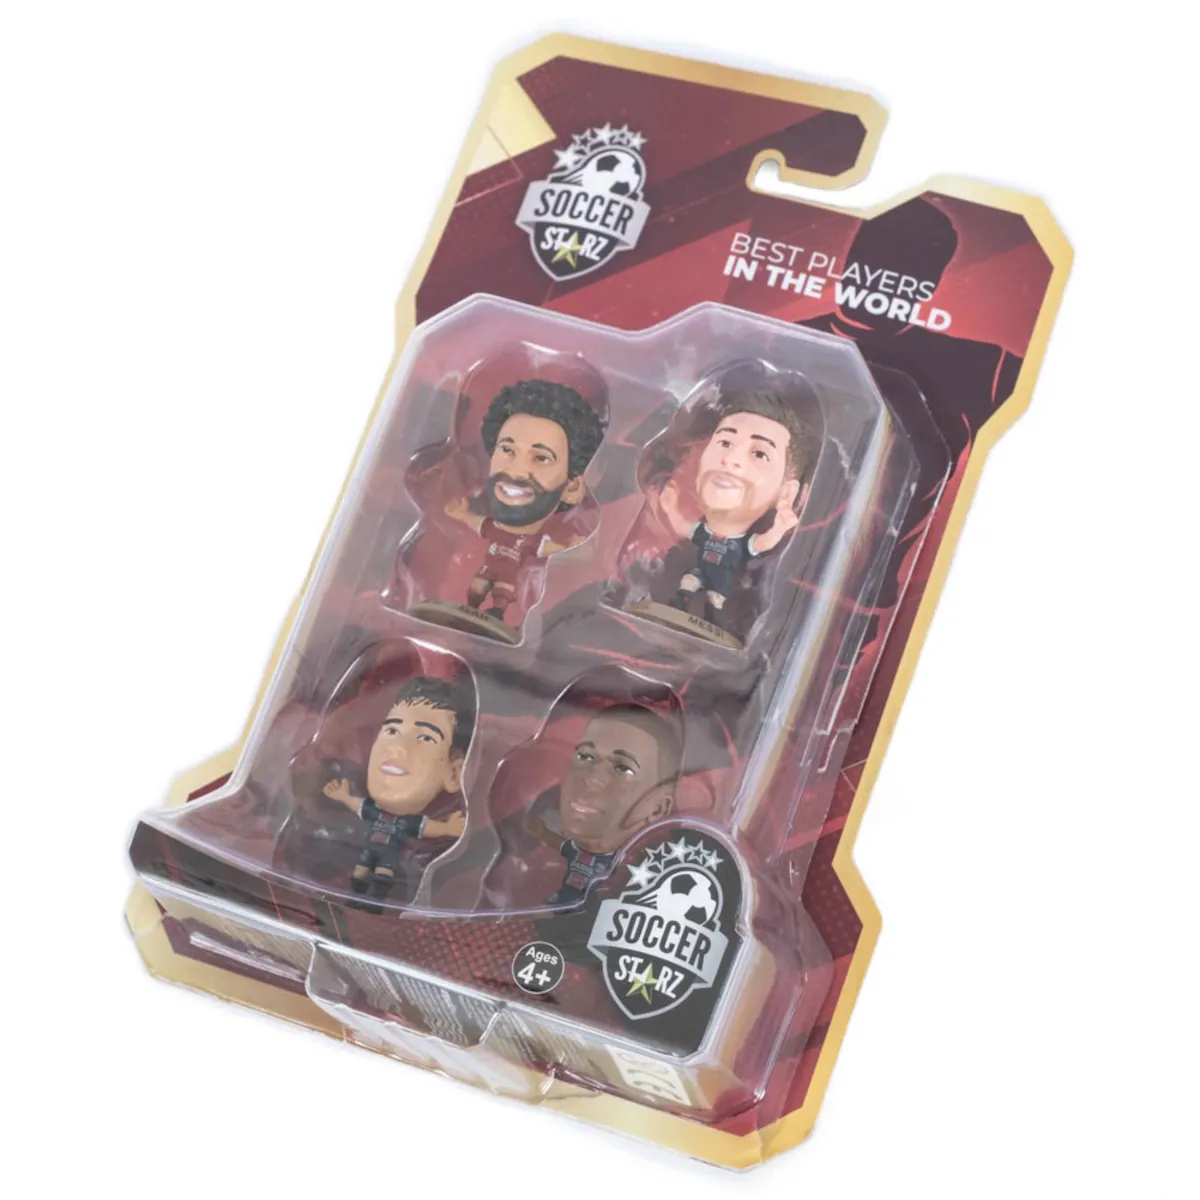 TM-05395 World’s 4 Best Players SoccerStarz Collectable Figures (4-Pack) Packing